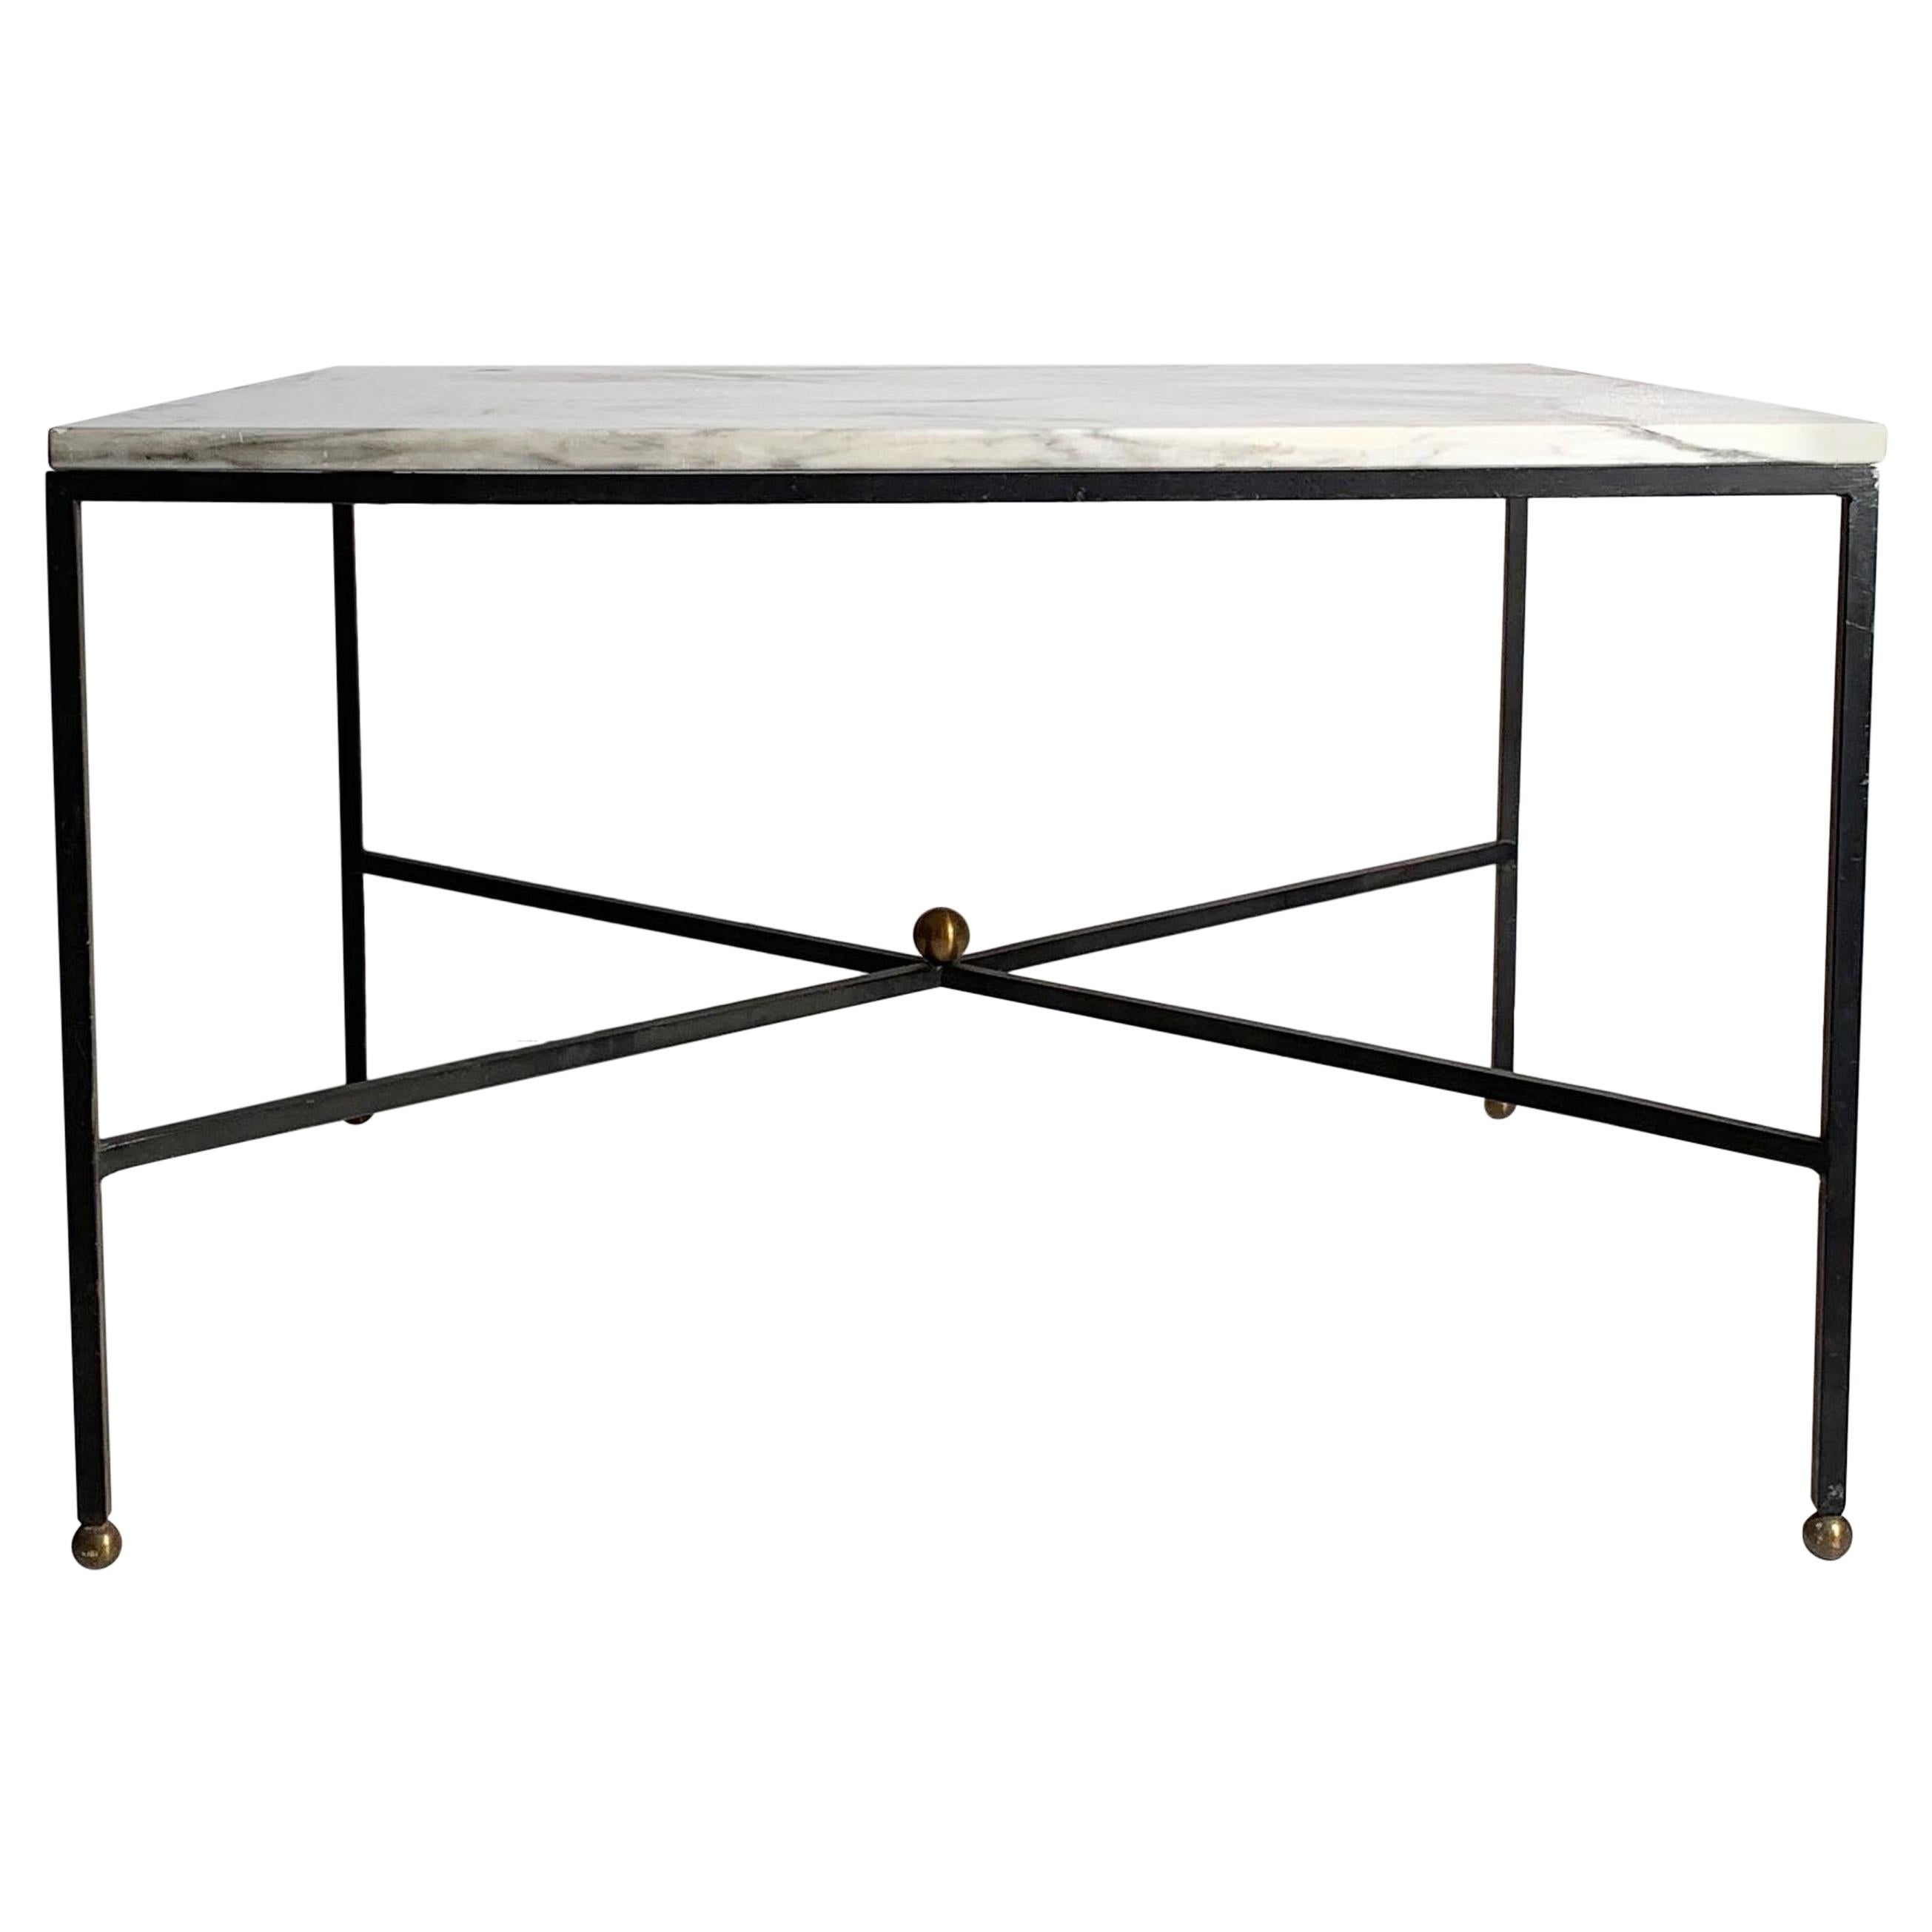 Elegant Architectural Mid-Century Modern Italian Iron and Marble Coffee Table For Sale